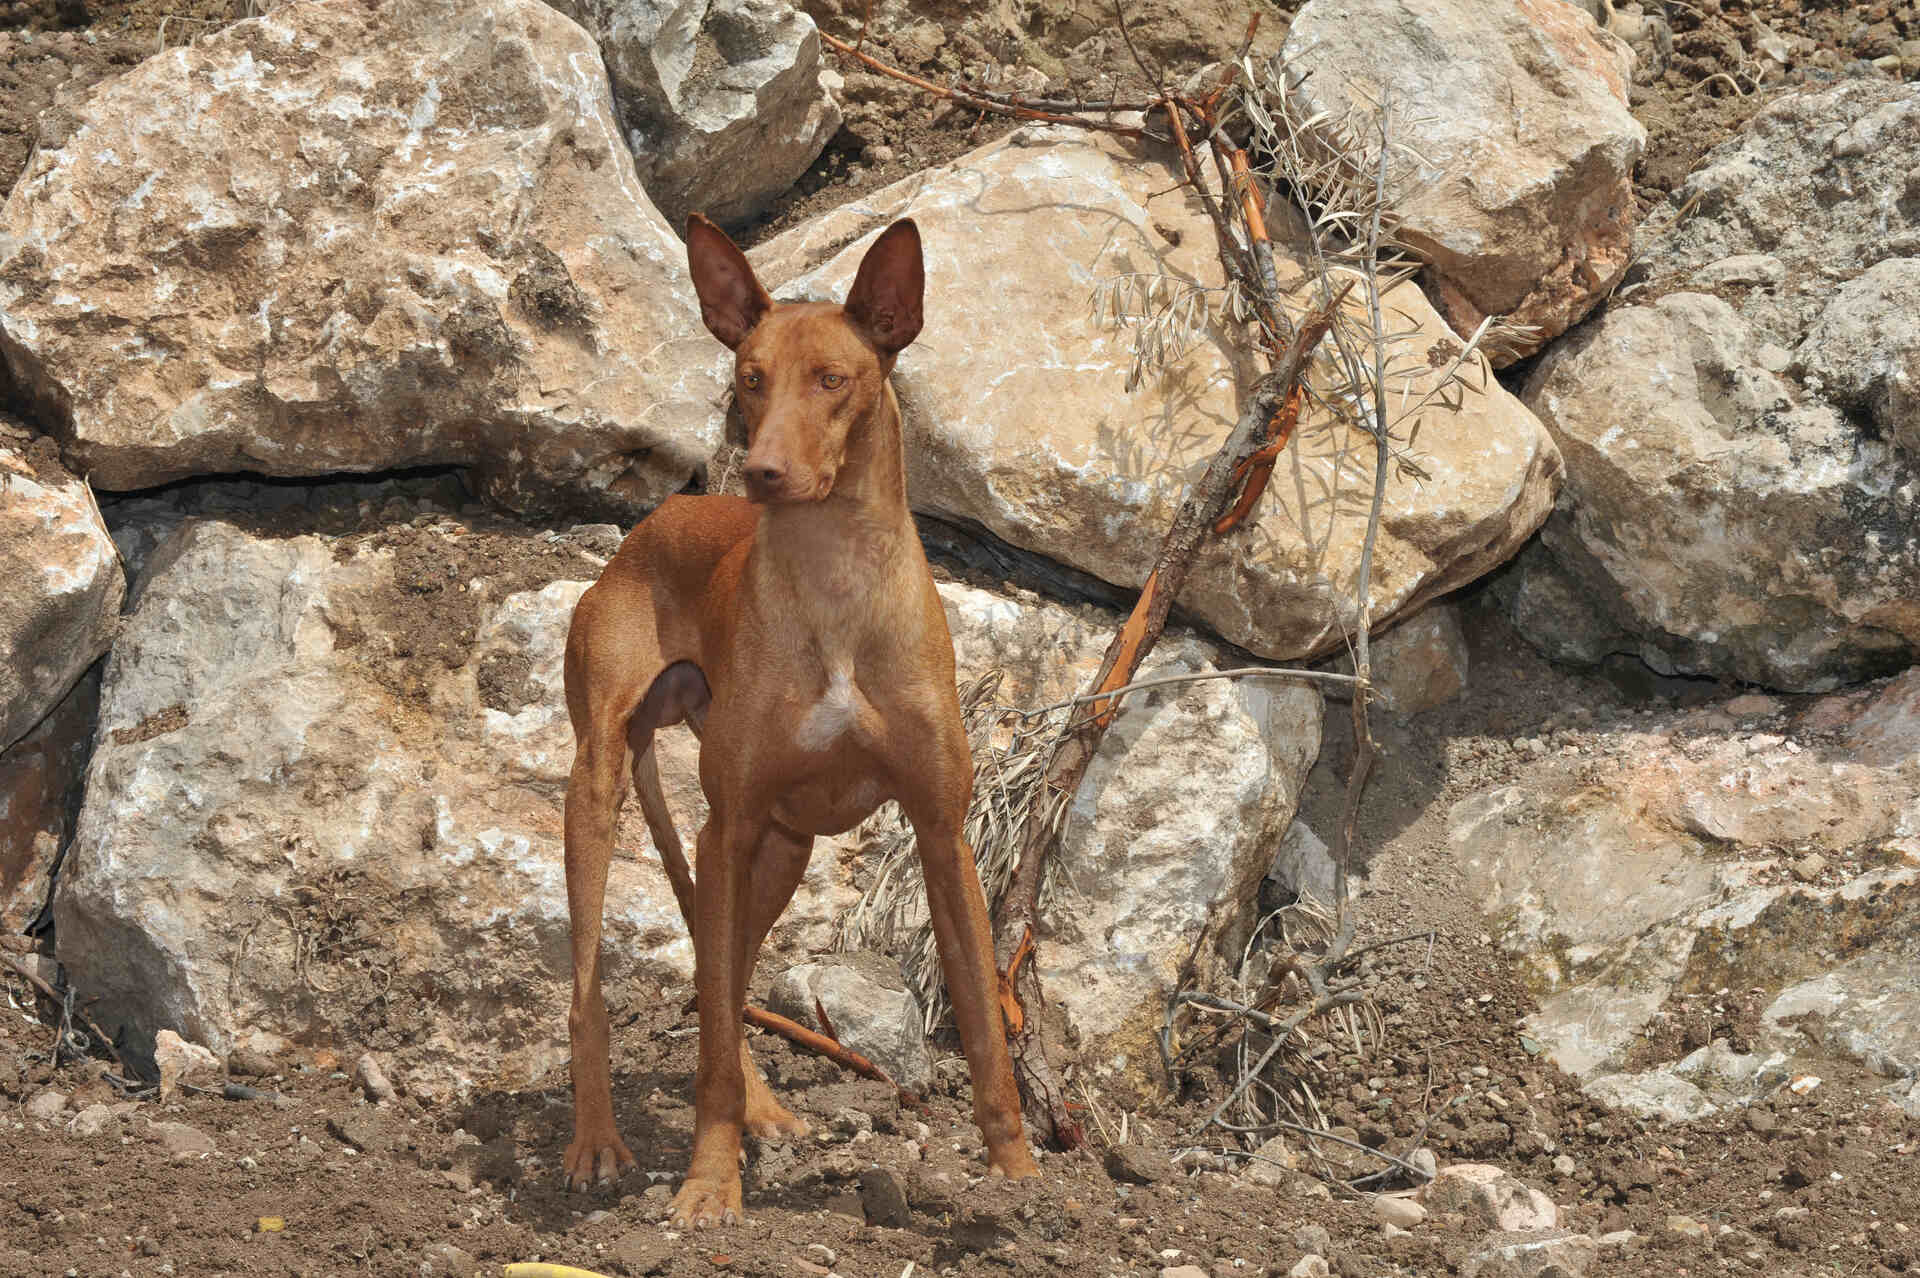 A Pharaoh hound by a pile of rocks